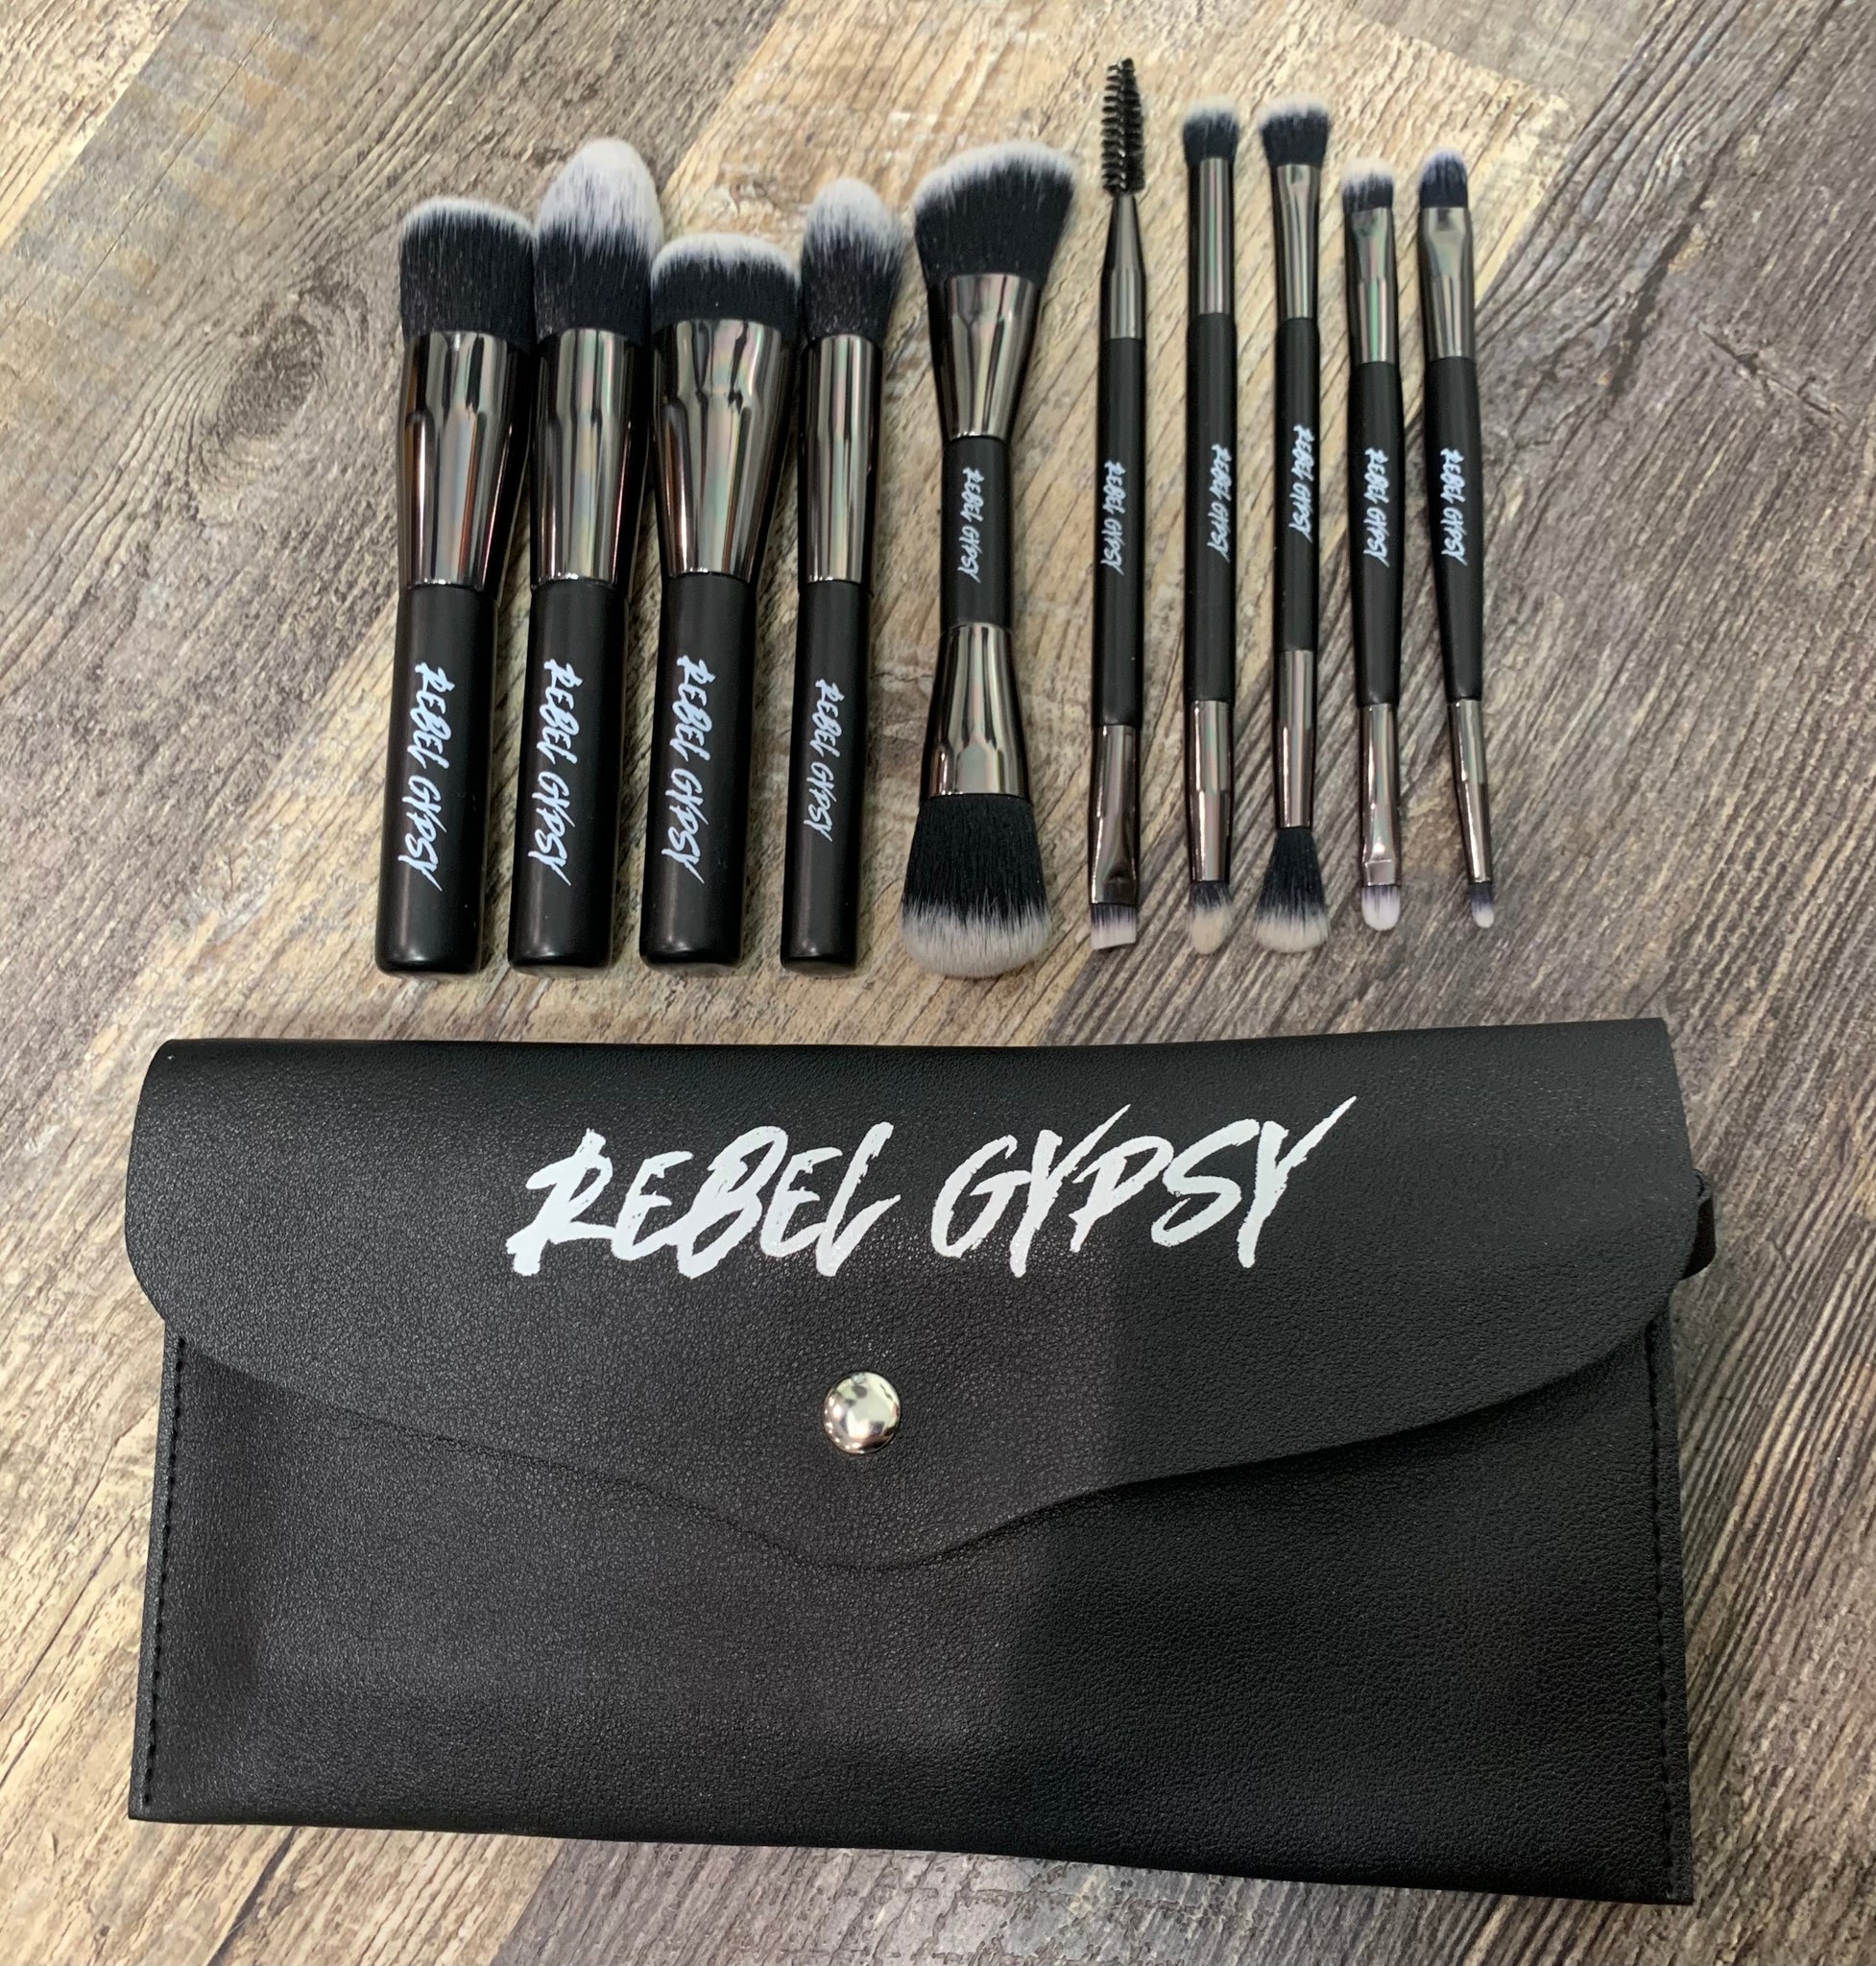 Lovely Expressions Premium Makeup Brushes